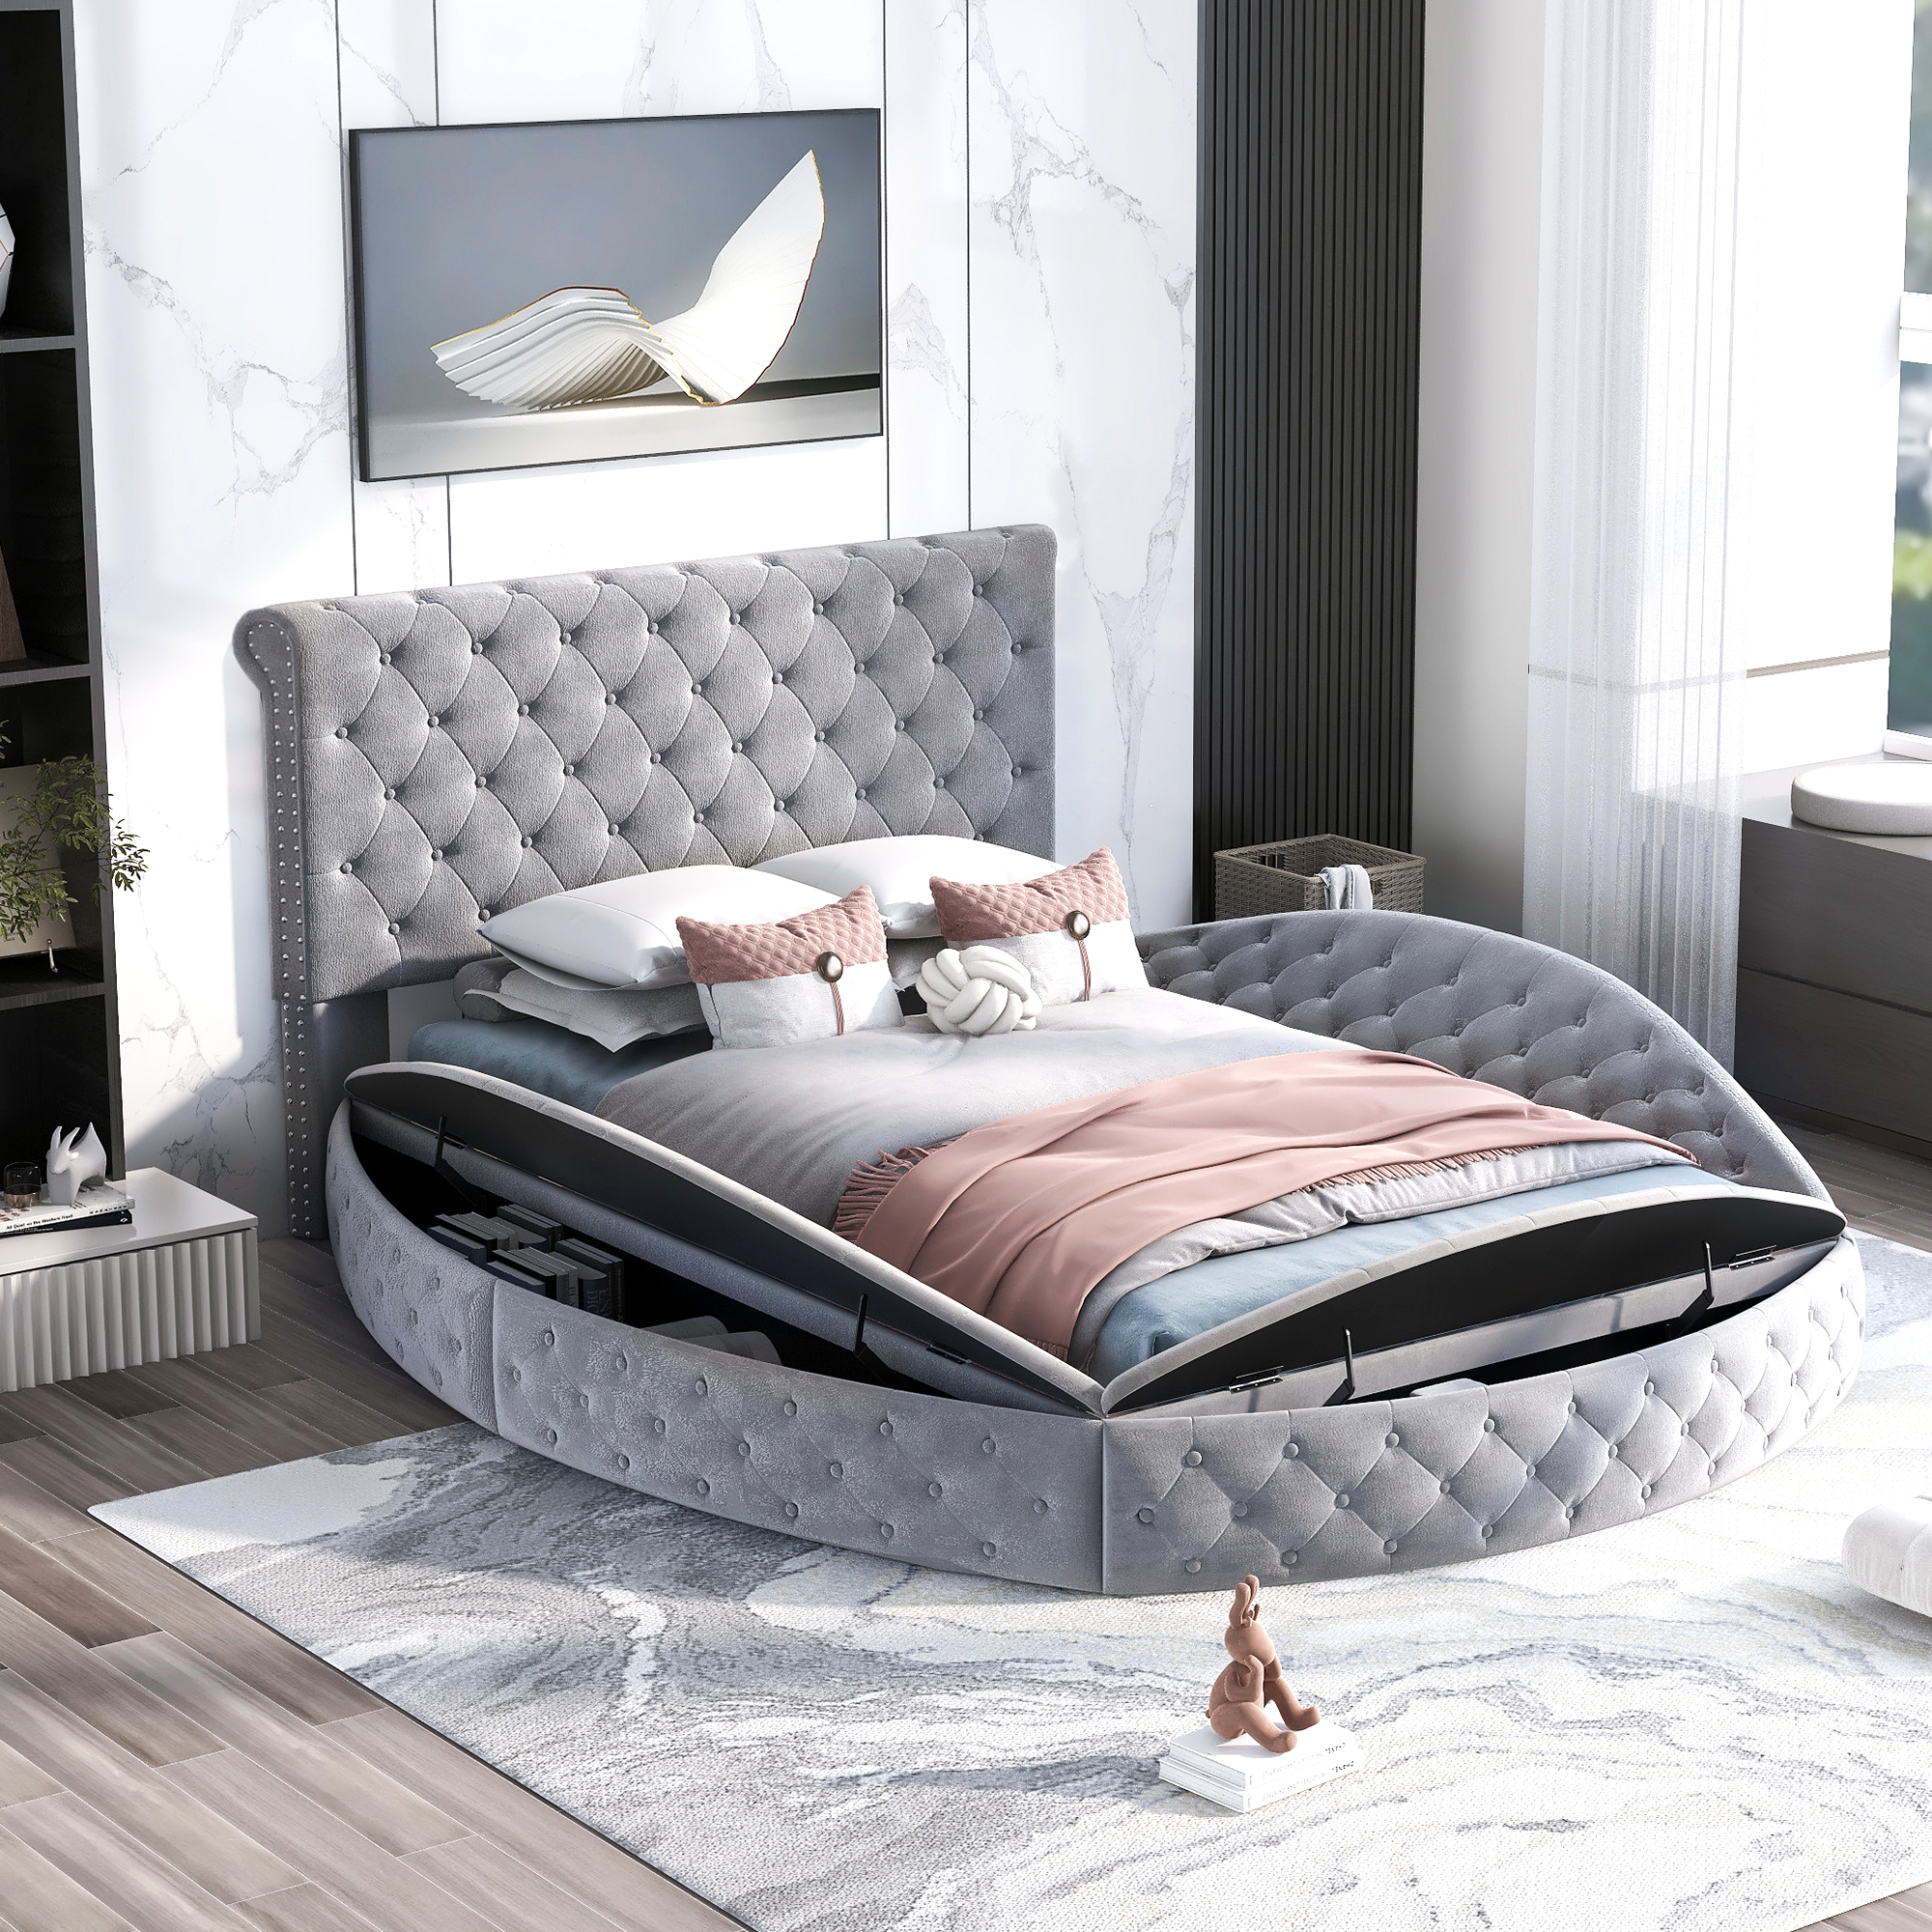 Full Size Round Shape Upholstery Low Profile Storage Platform Bed with Storage Space on Both Sides, Gray - image 3 of 11